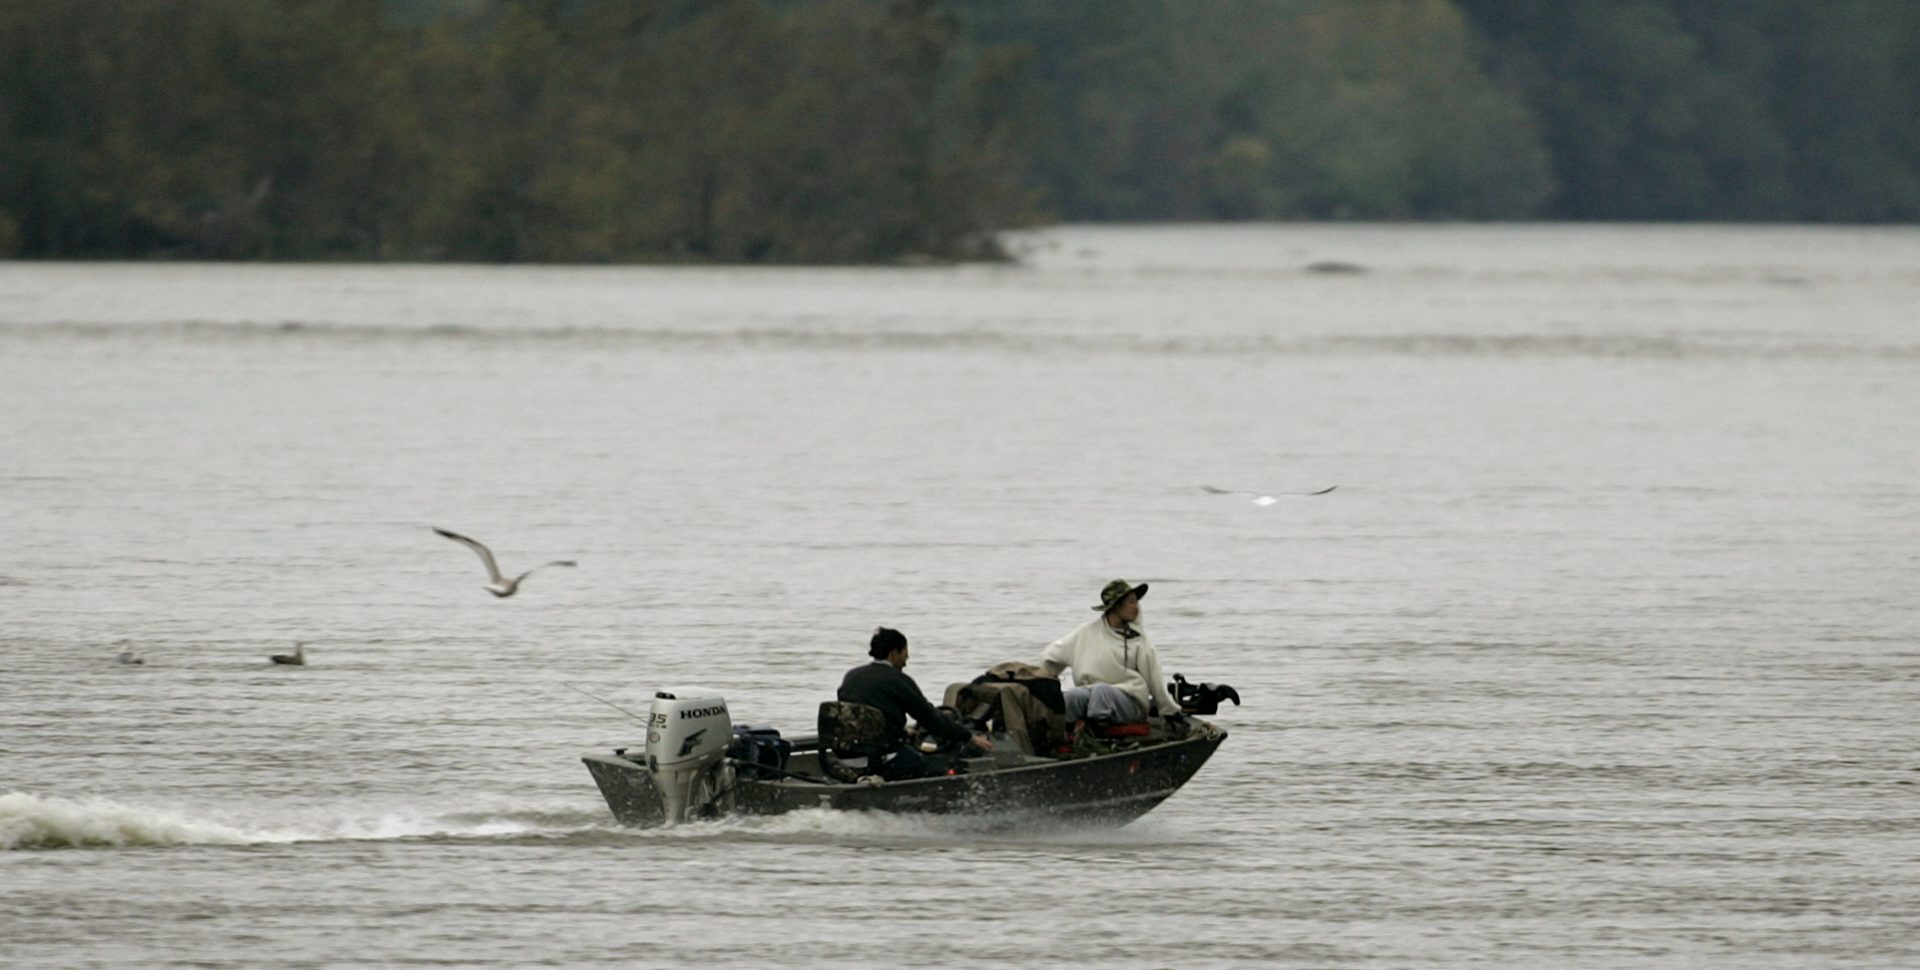 Fisherman on the Susquehanna River. It supplies half the freshwater flowing into the Chesapeake Bay.